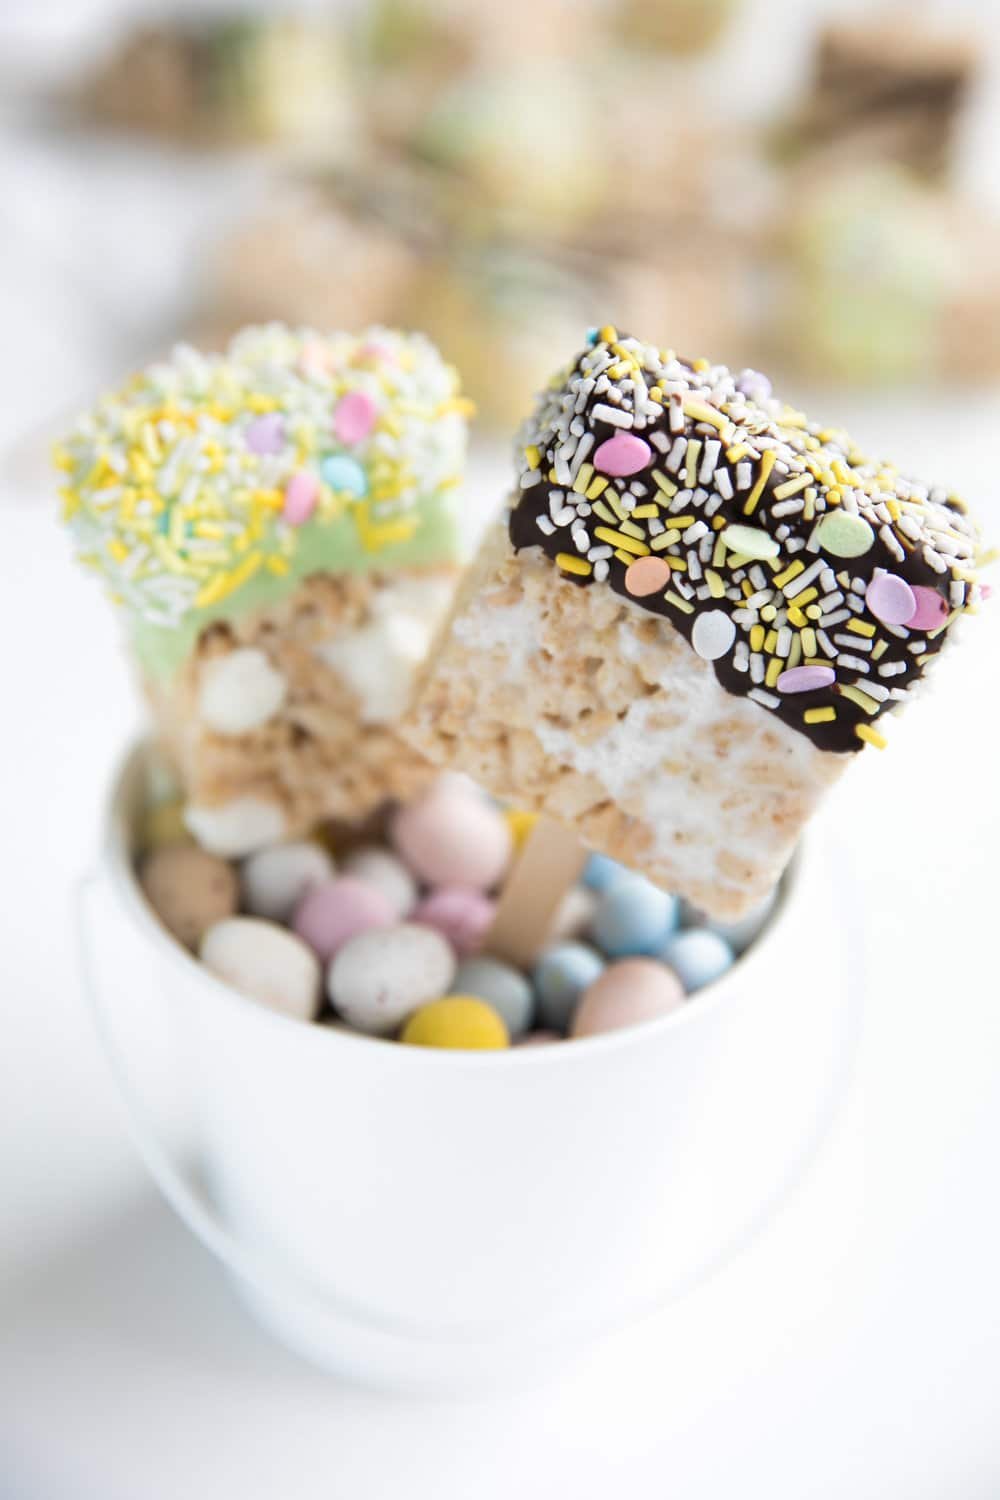 A close up of a chocolate-dipped Easter rice Krispie treat squares